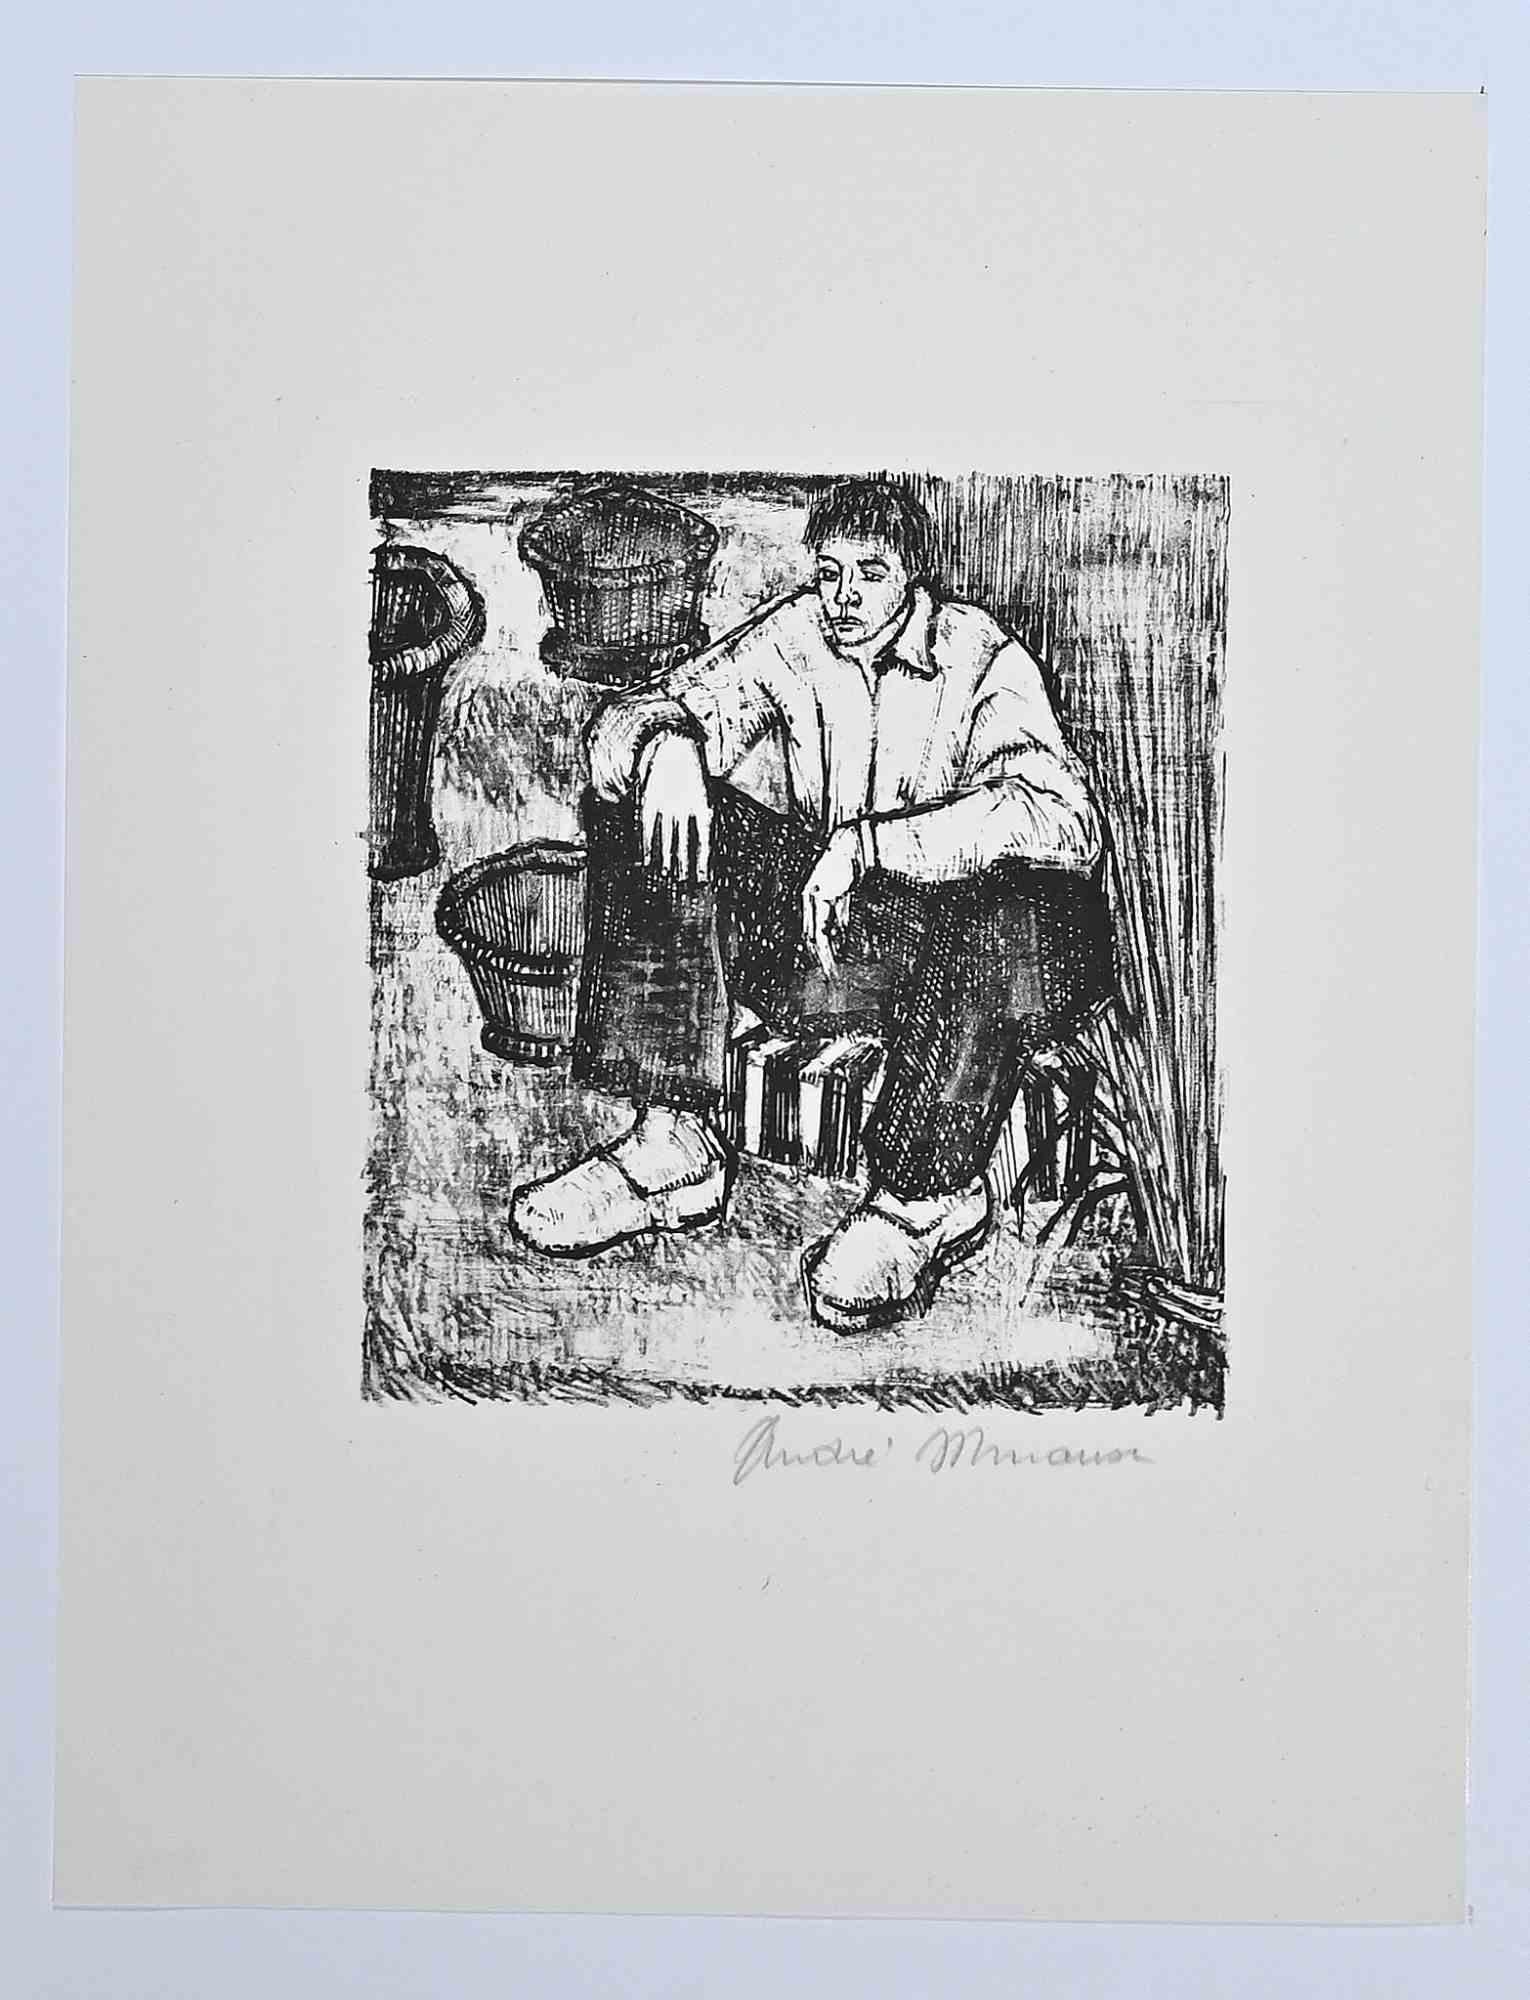 André Minaux Figurative Print - The Boy - Original Lithograph by Andre Minaux - mid-20th Century